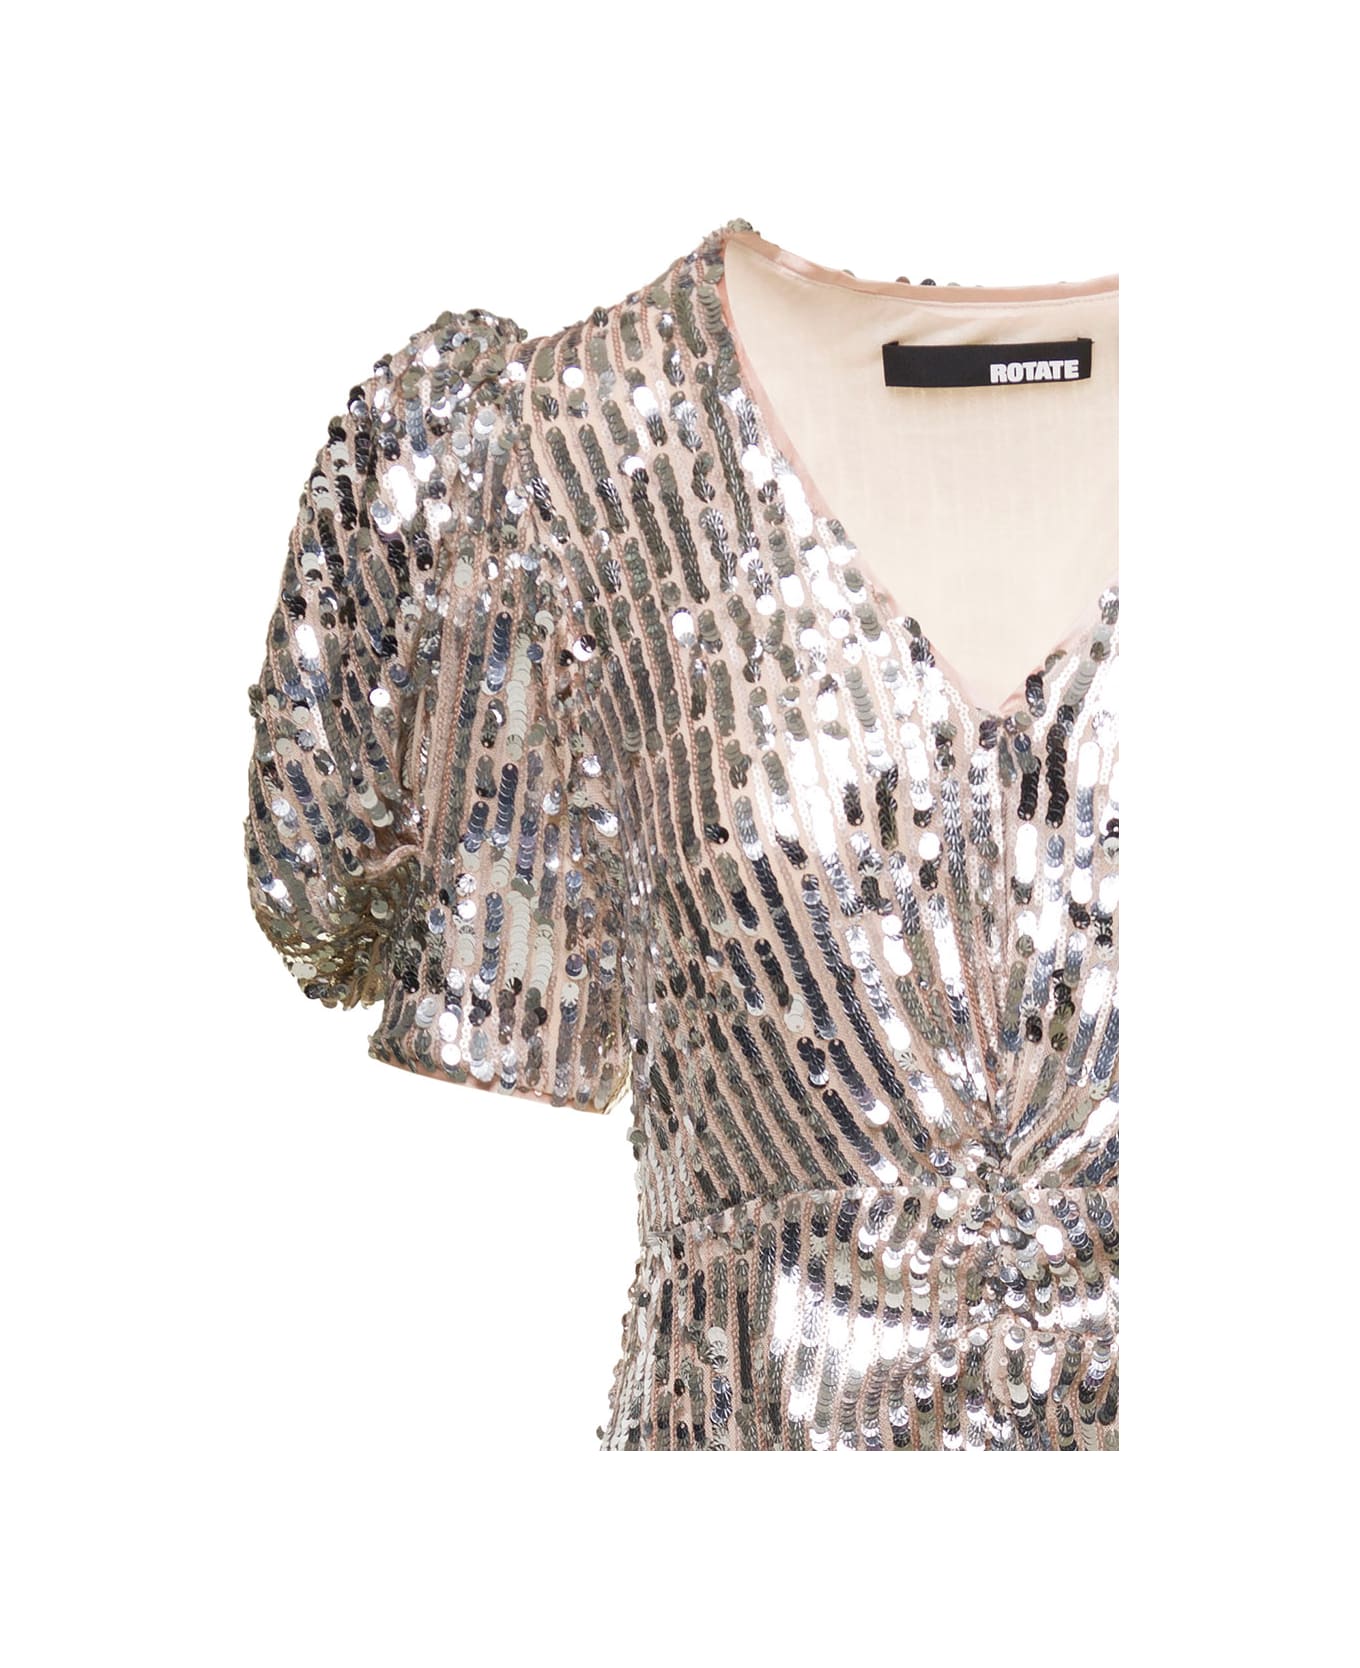 Rotate by Birger Christensen 'sierina' Silver-tone Midi Dress With All-over Sequins Woman Rotate - Metallic